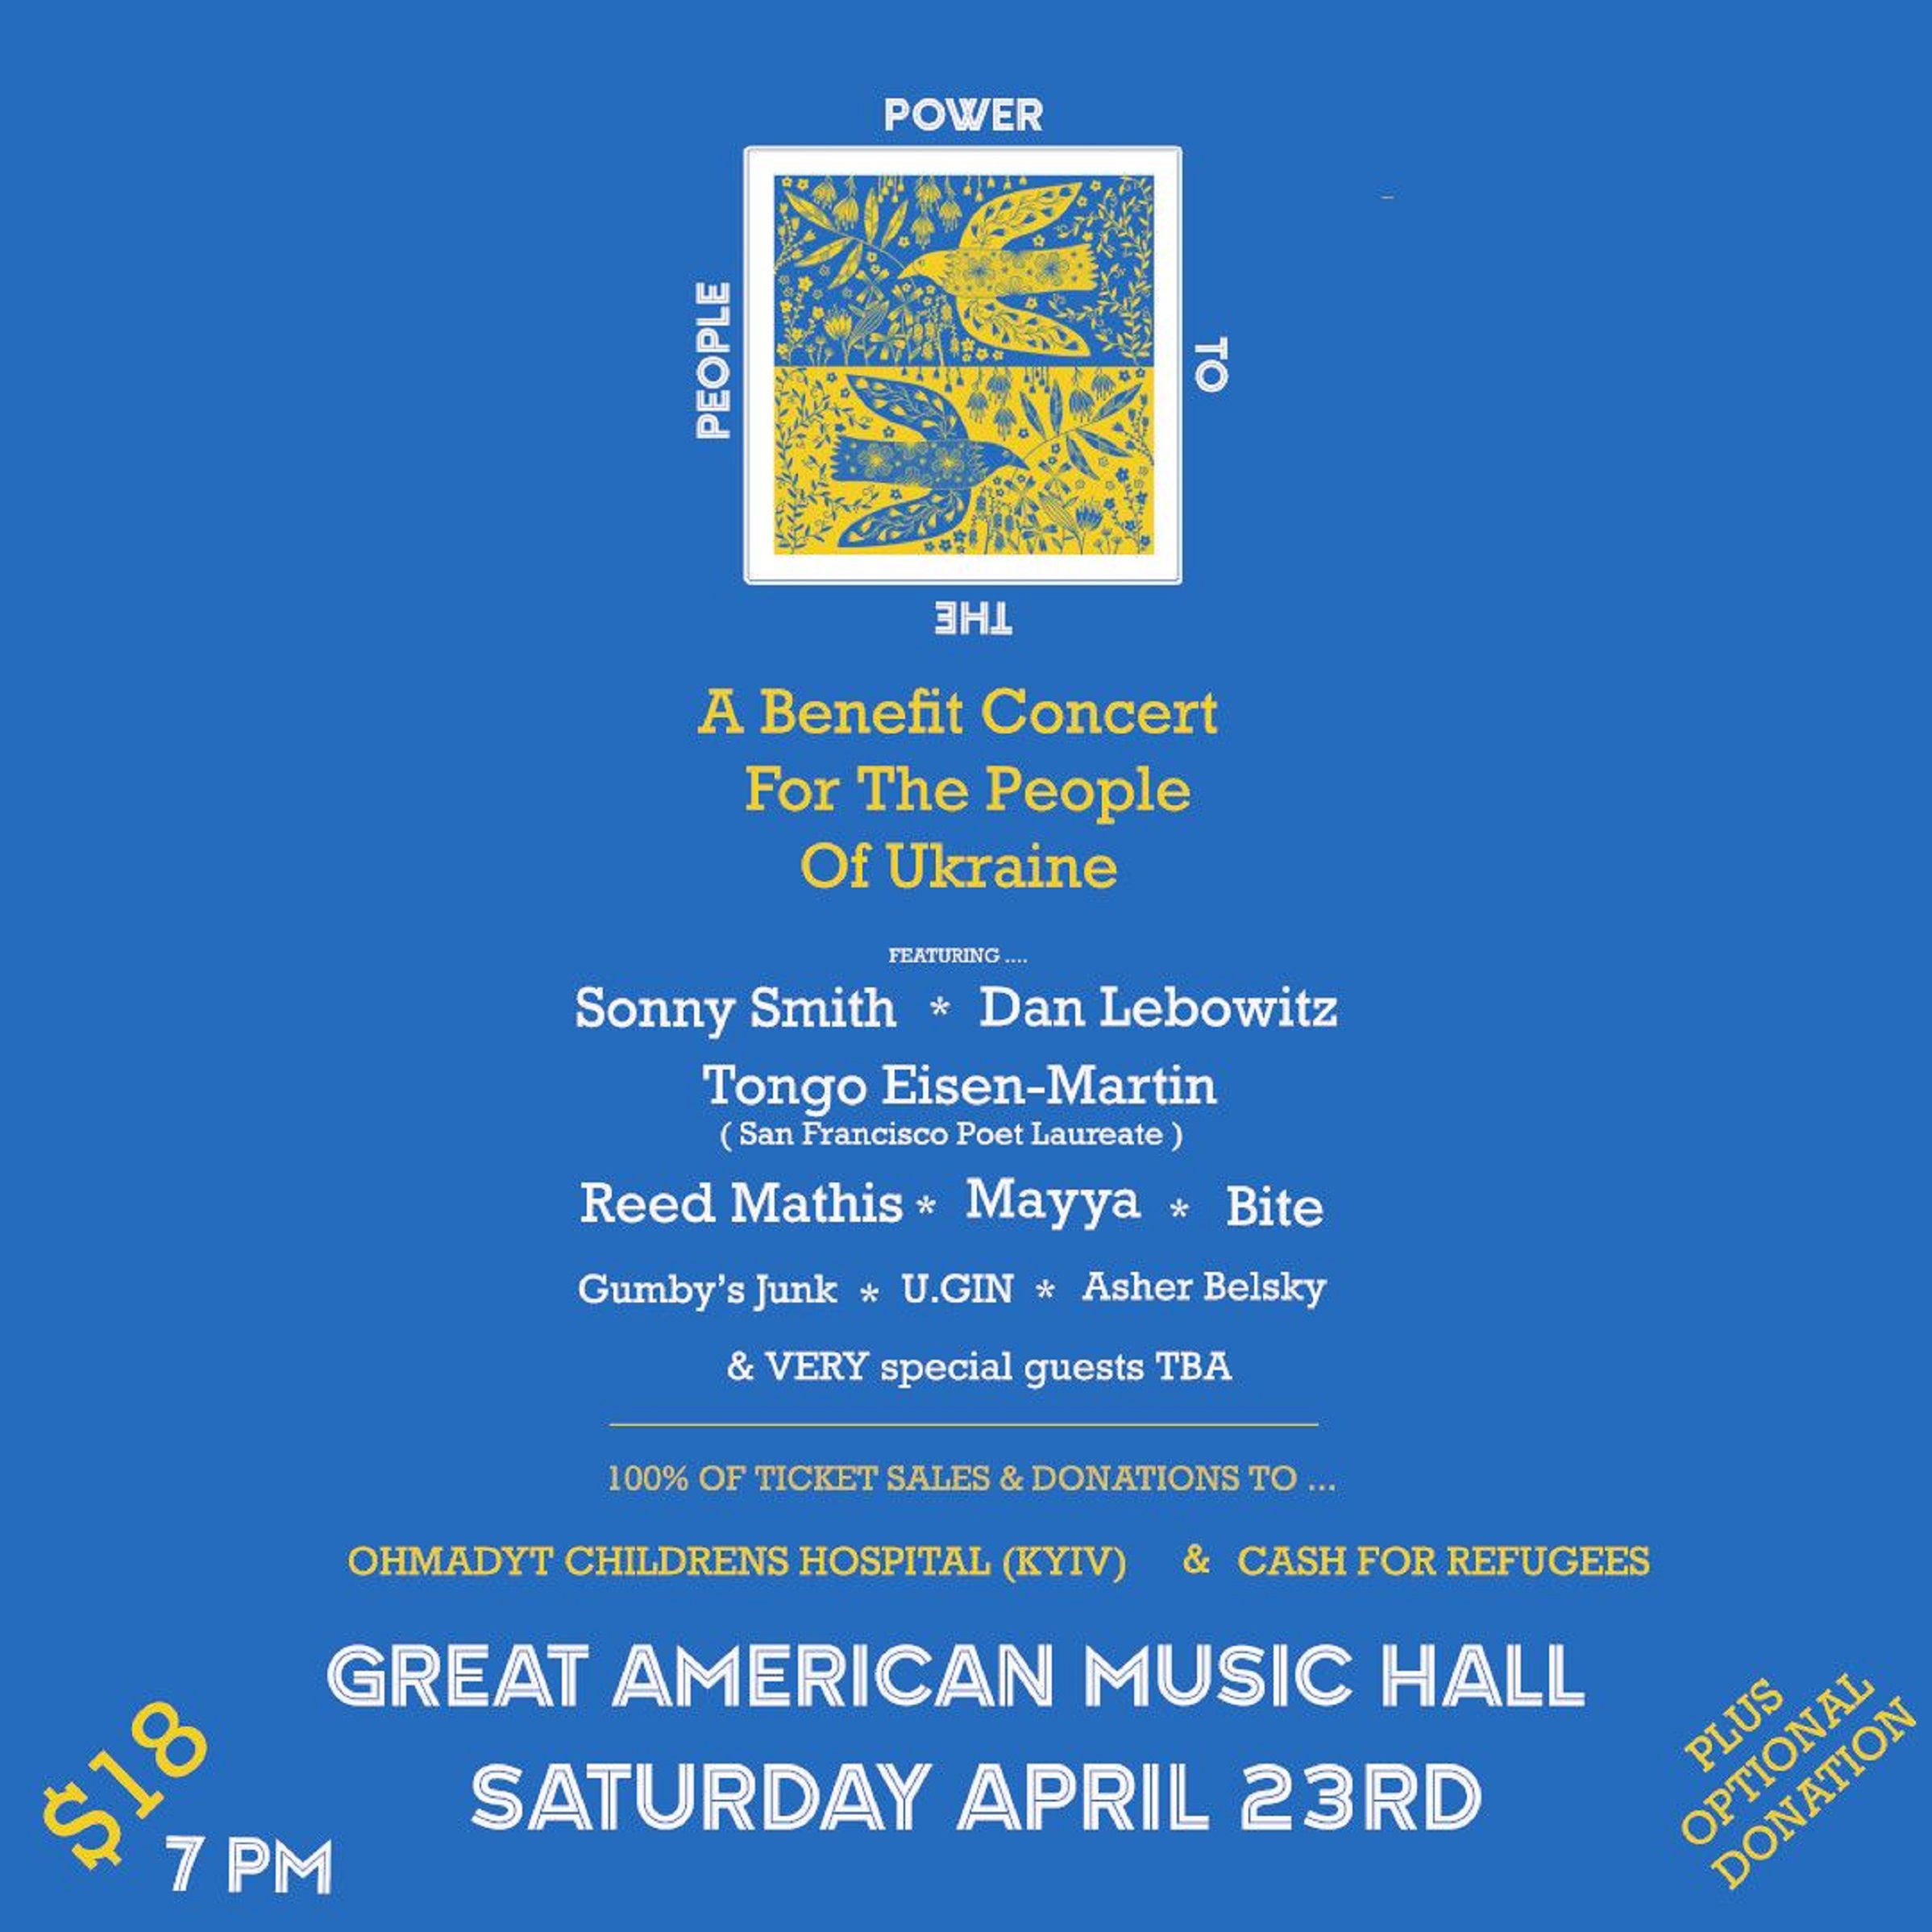 Great American Music Hall hosting Ukraine benefit feat. Dan Lebowitz, Reed Mathis, Sonny Smith & more